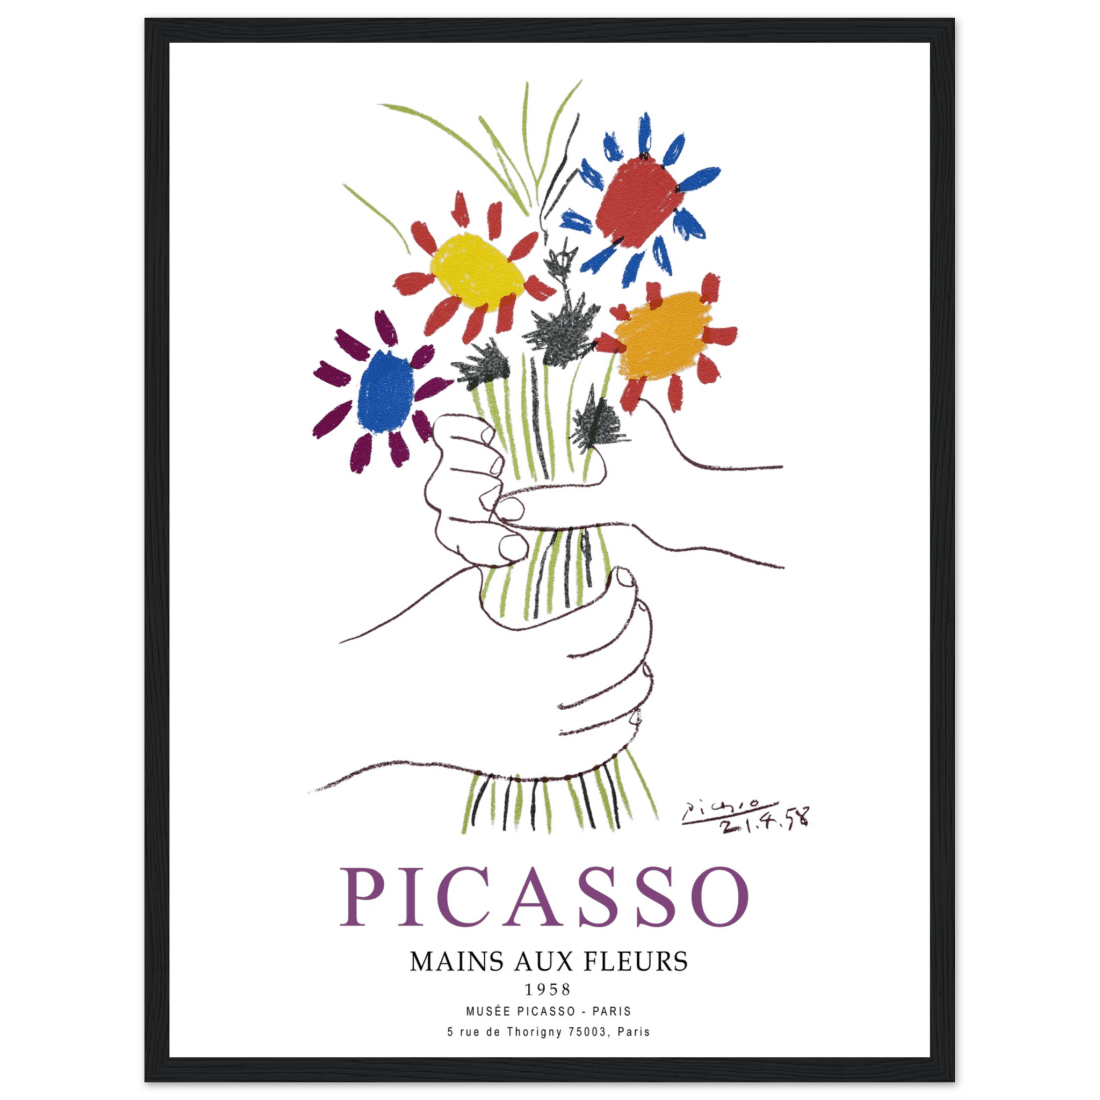 Pablo Picasso Hands With Flowers 1958 Artwork Poster